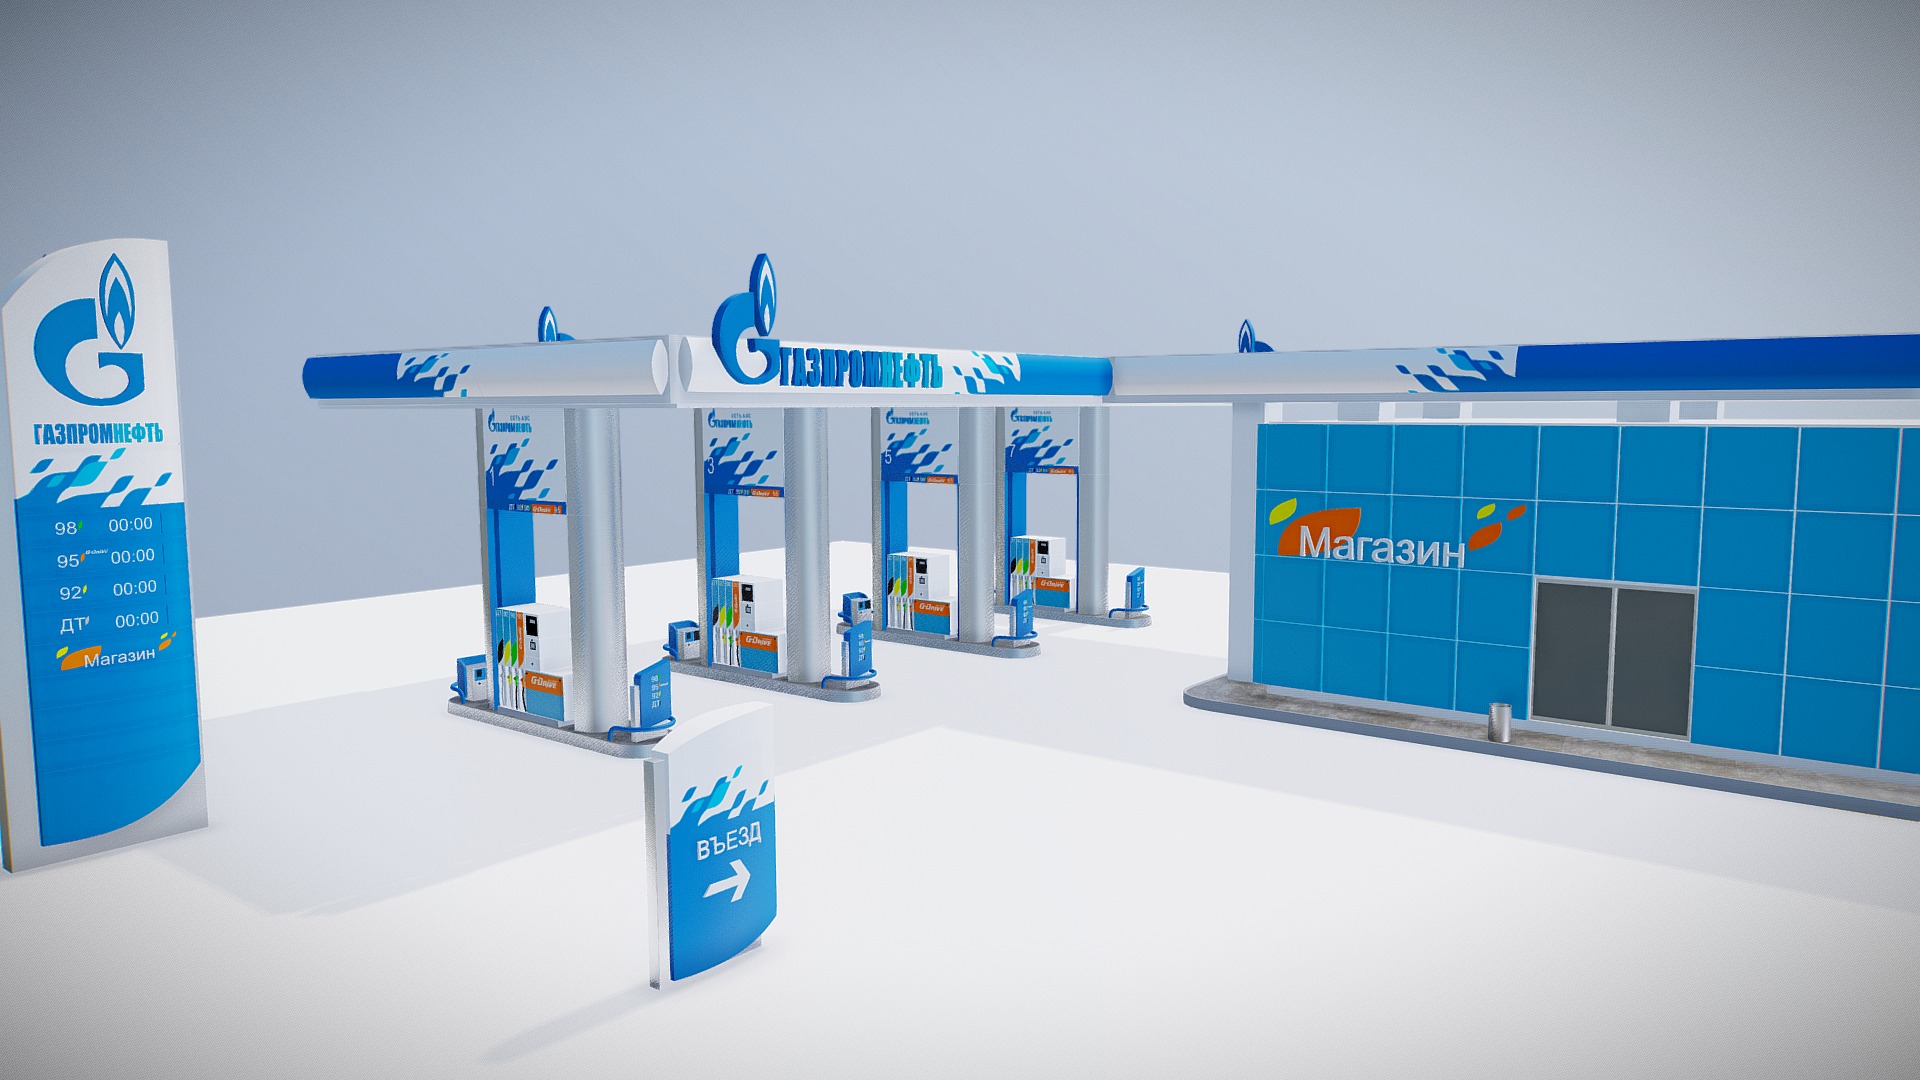 3D model Gasprom petrol Station Low-poly 3D model - This is a 3D model of the Gasprom petrol Station Low-poly 3D model. The 3D model is about a group of blue and white containers.